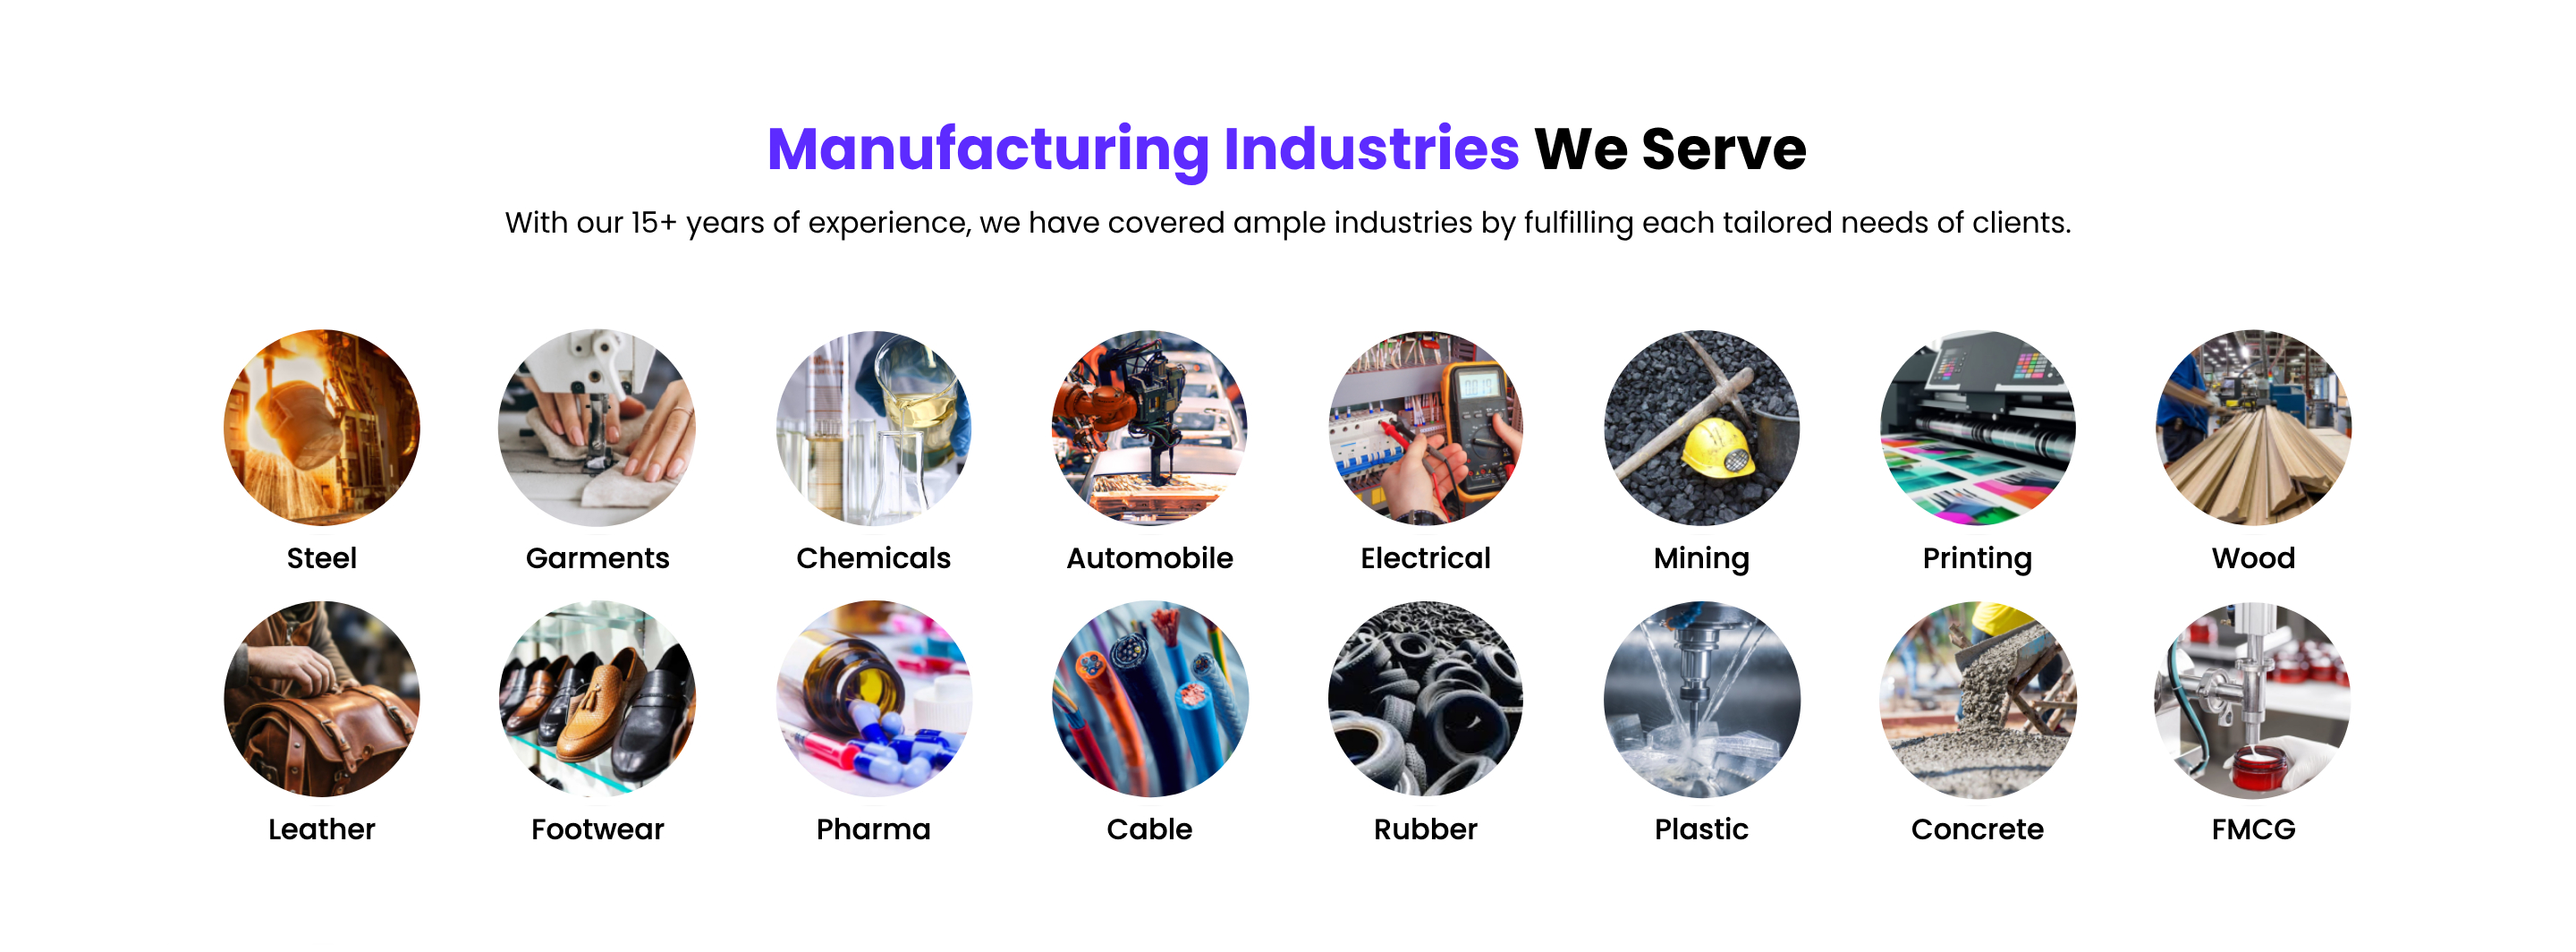 Puducherry's diverse industrial landscape, covering textiles, chemicals, pharmaceuticals, food processing, and tourism, can thrive with ERP implementation. Leverage ERP solutions to streamline operations, enhance efficiency, and foster growth across these dynamic sectors.